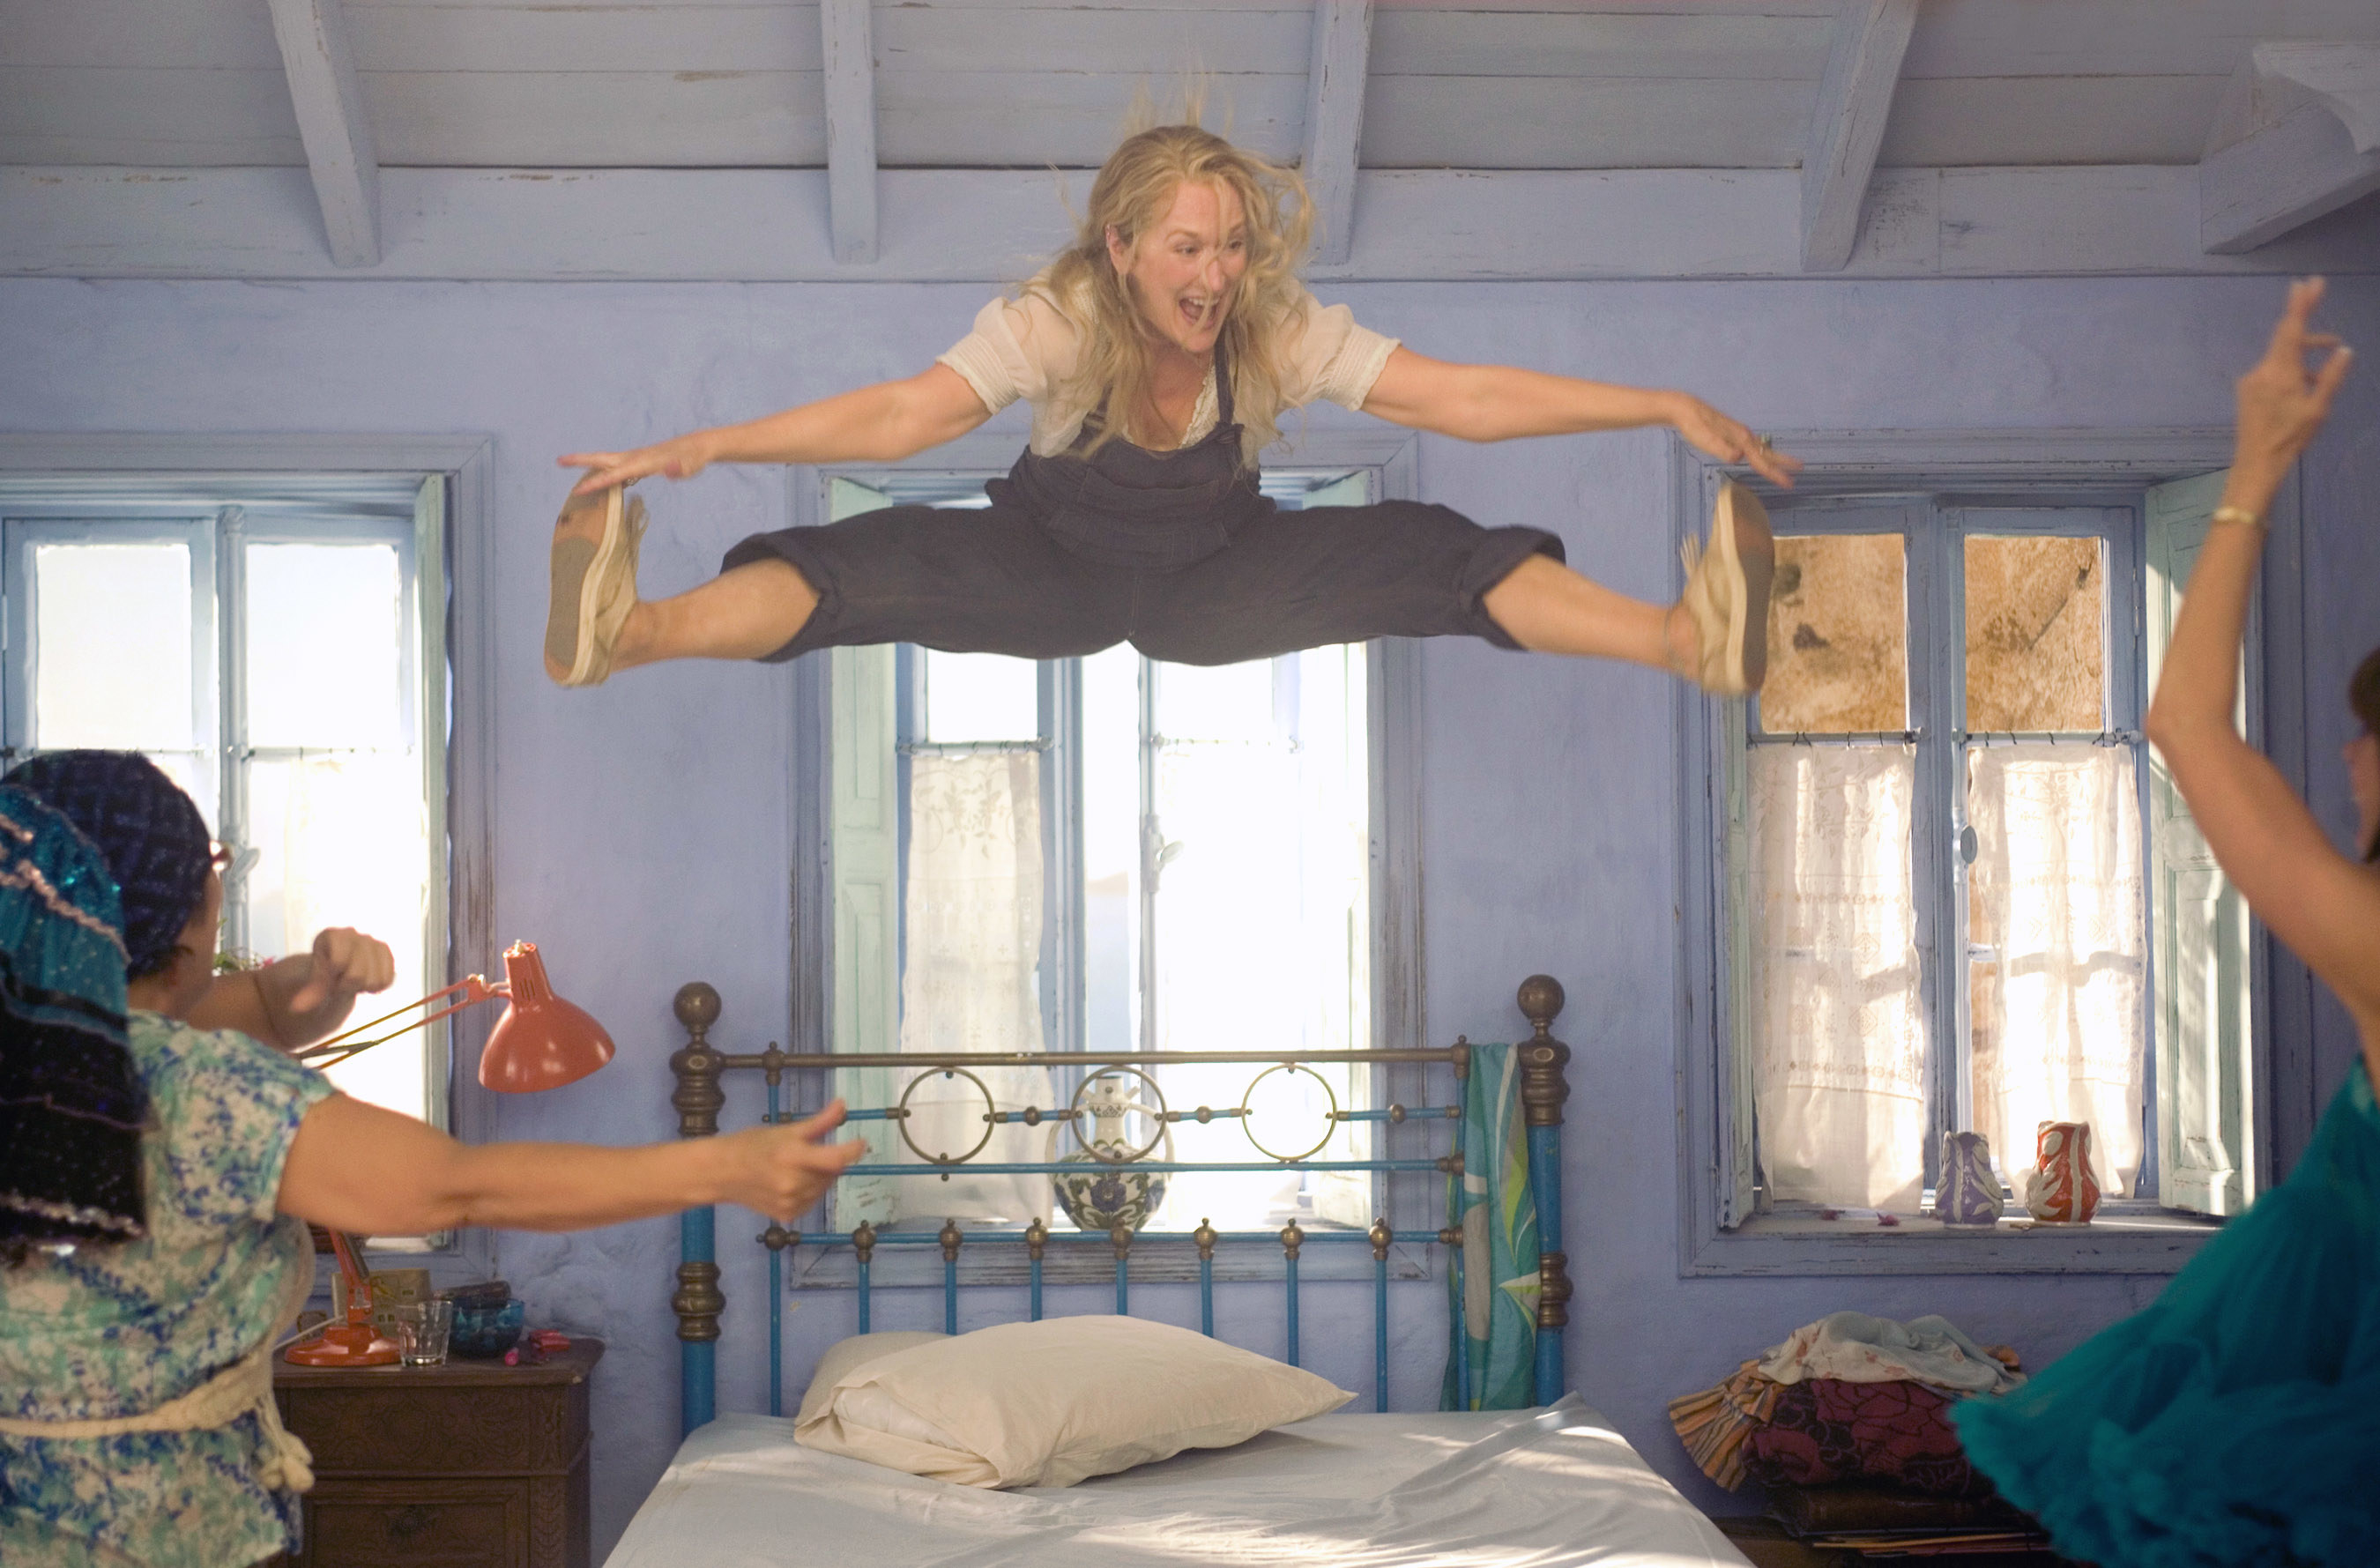 Meryl Streep jumps and does the splits above a bed